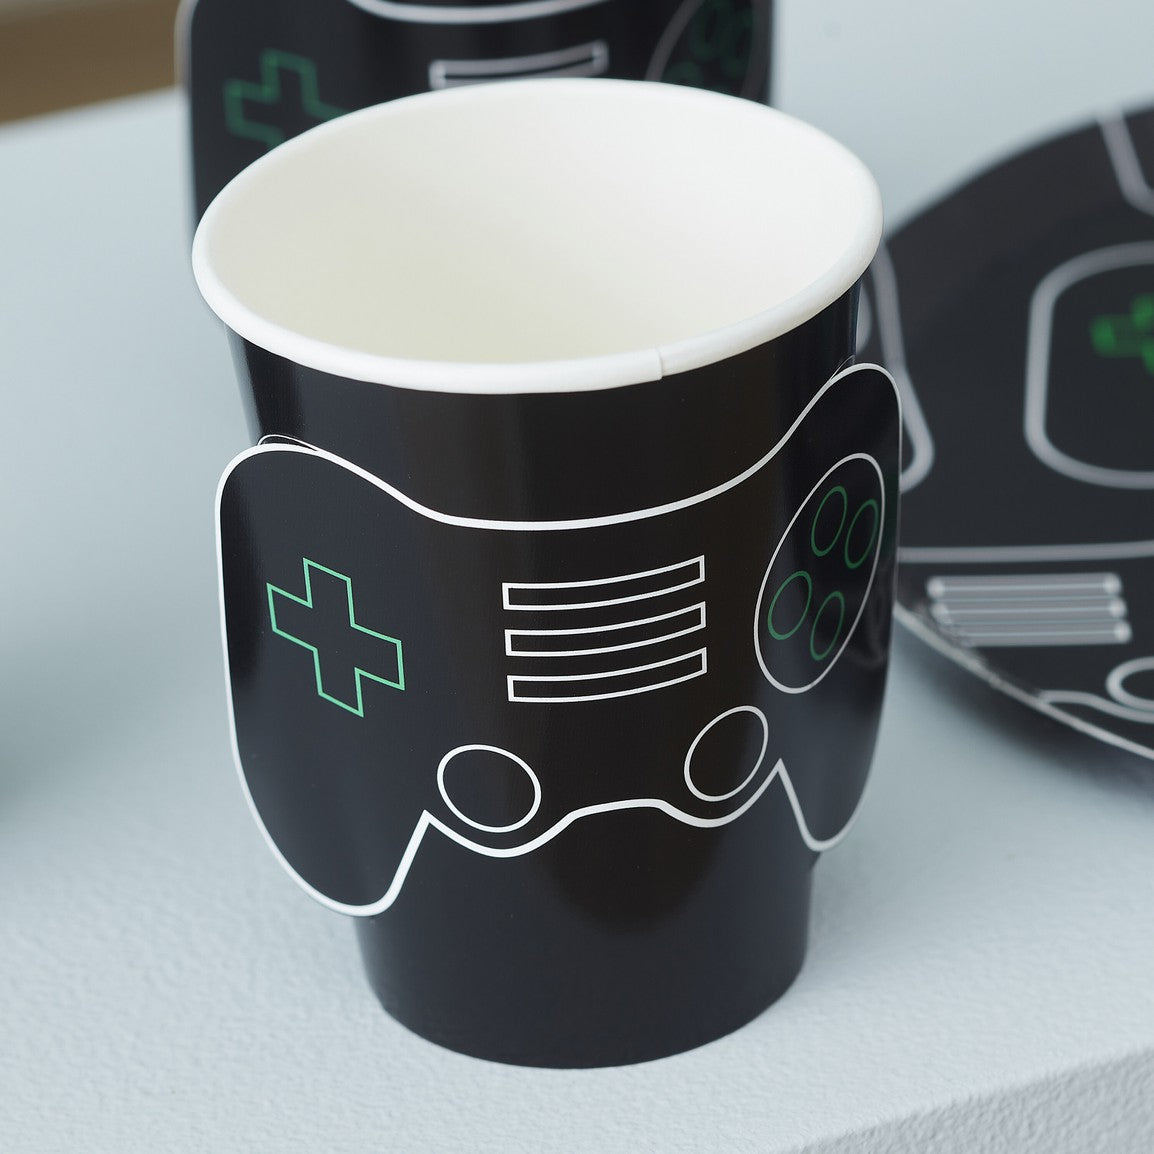 CUPS - BLACK LEVEL UP GAMING POP-OUT CONTROLLER